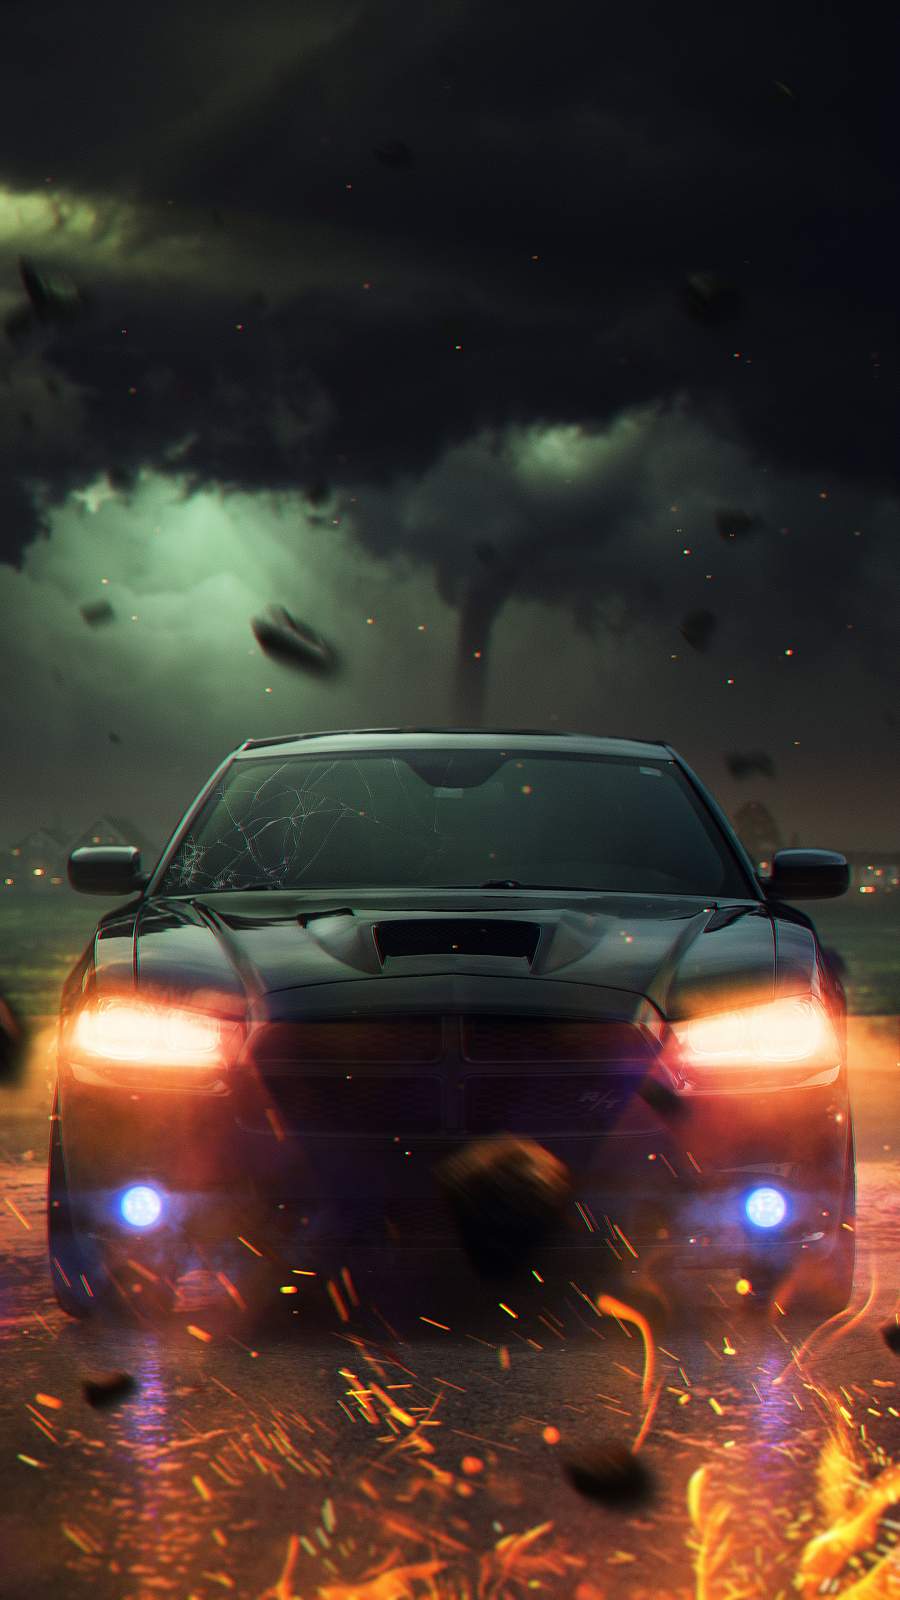 Charger Iphone Wallpapers